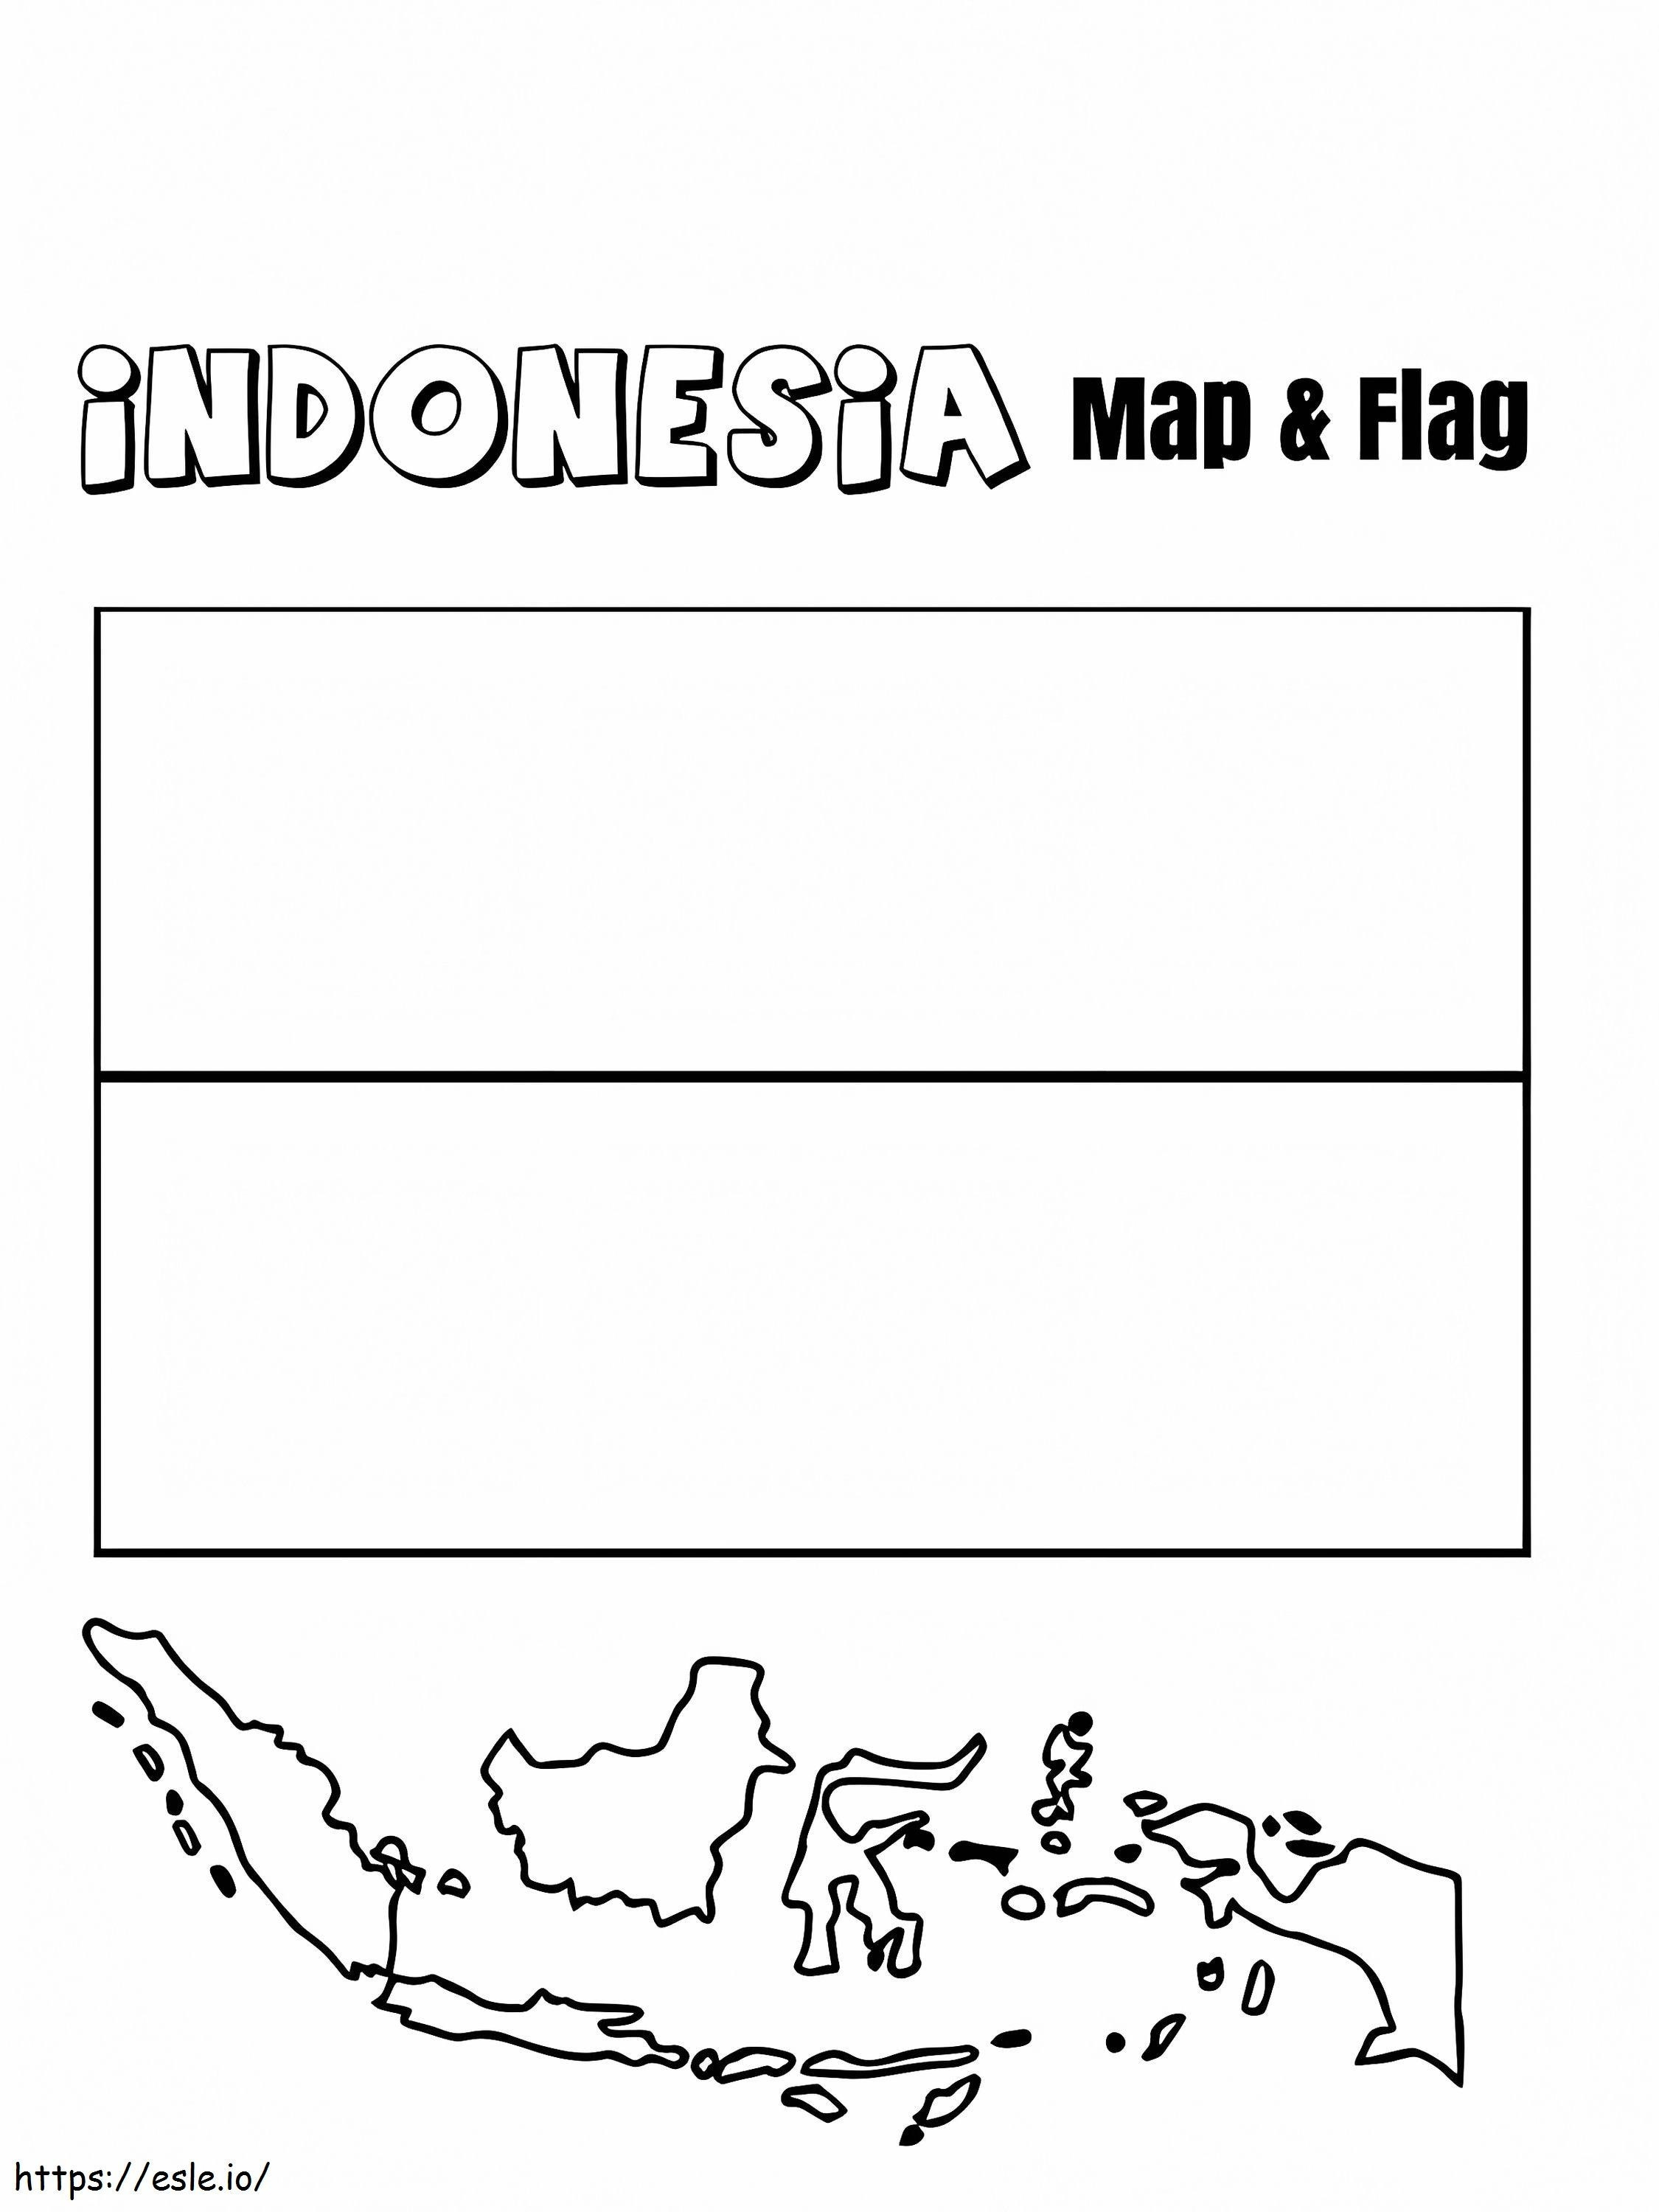 Indonesia Flag And Map coloring page